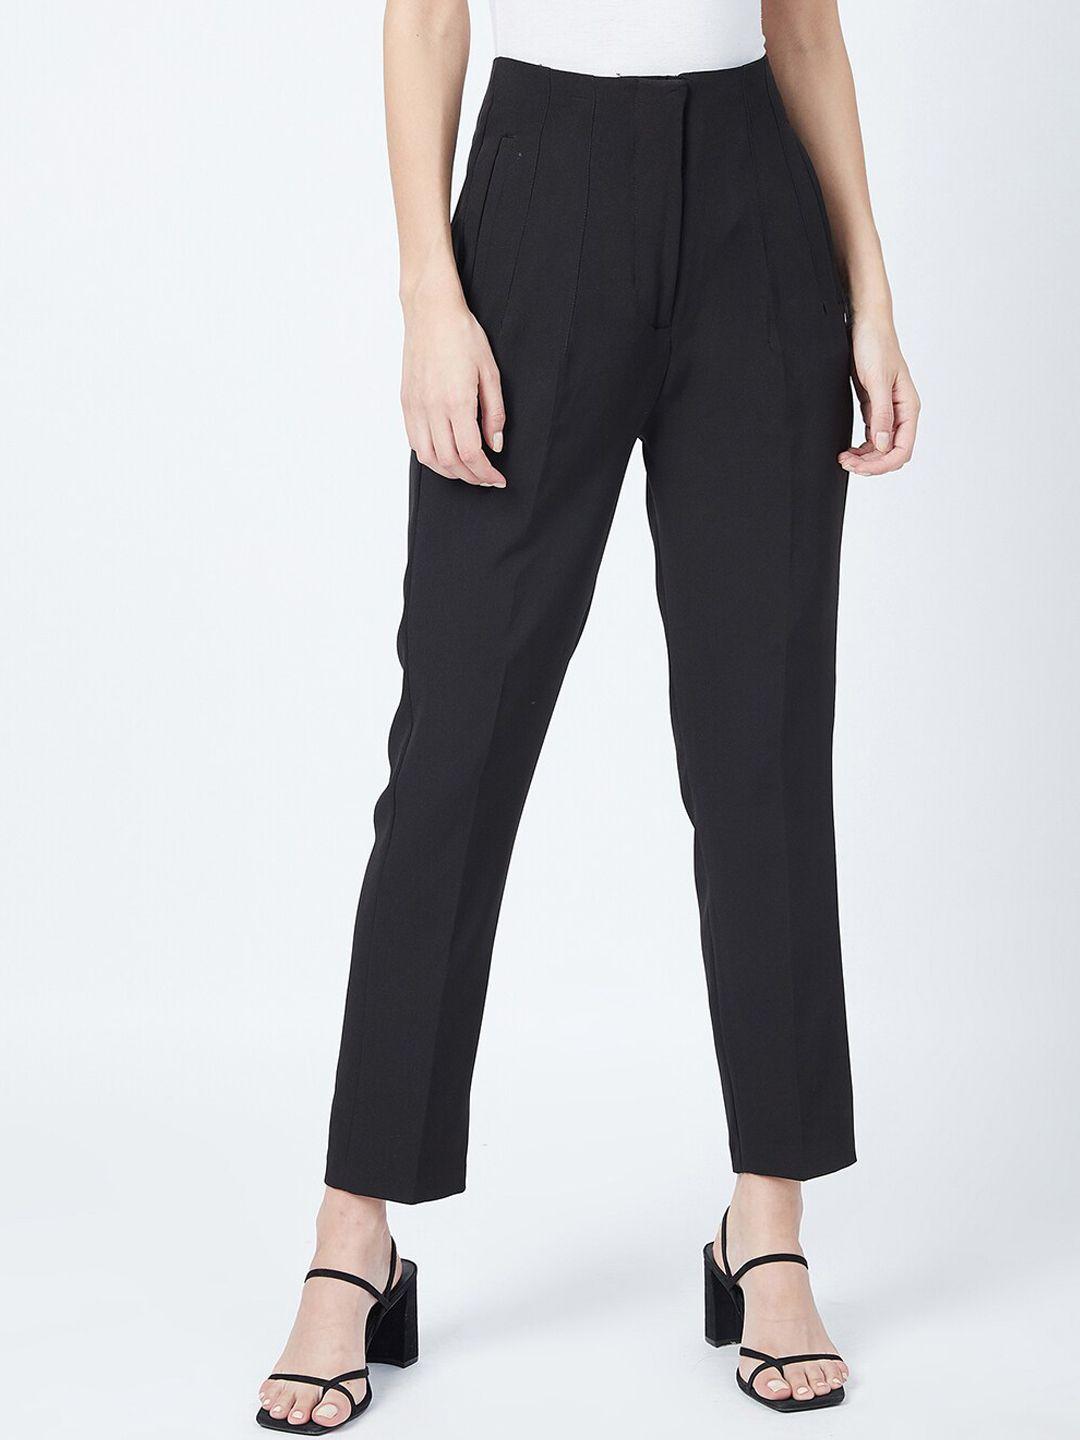 delan-women-black-relaxed-slim-fit-high-rise-easy-wash-trousers